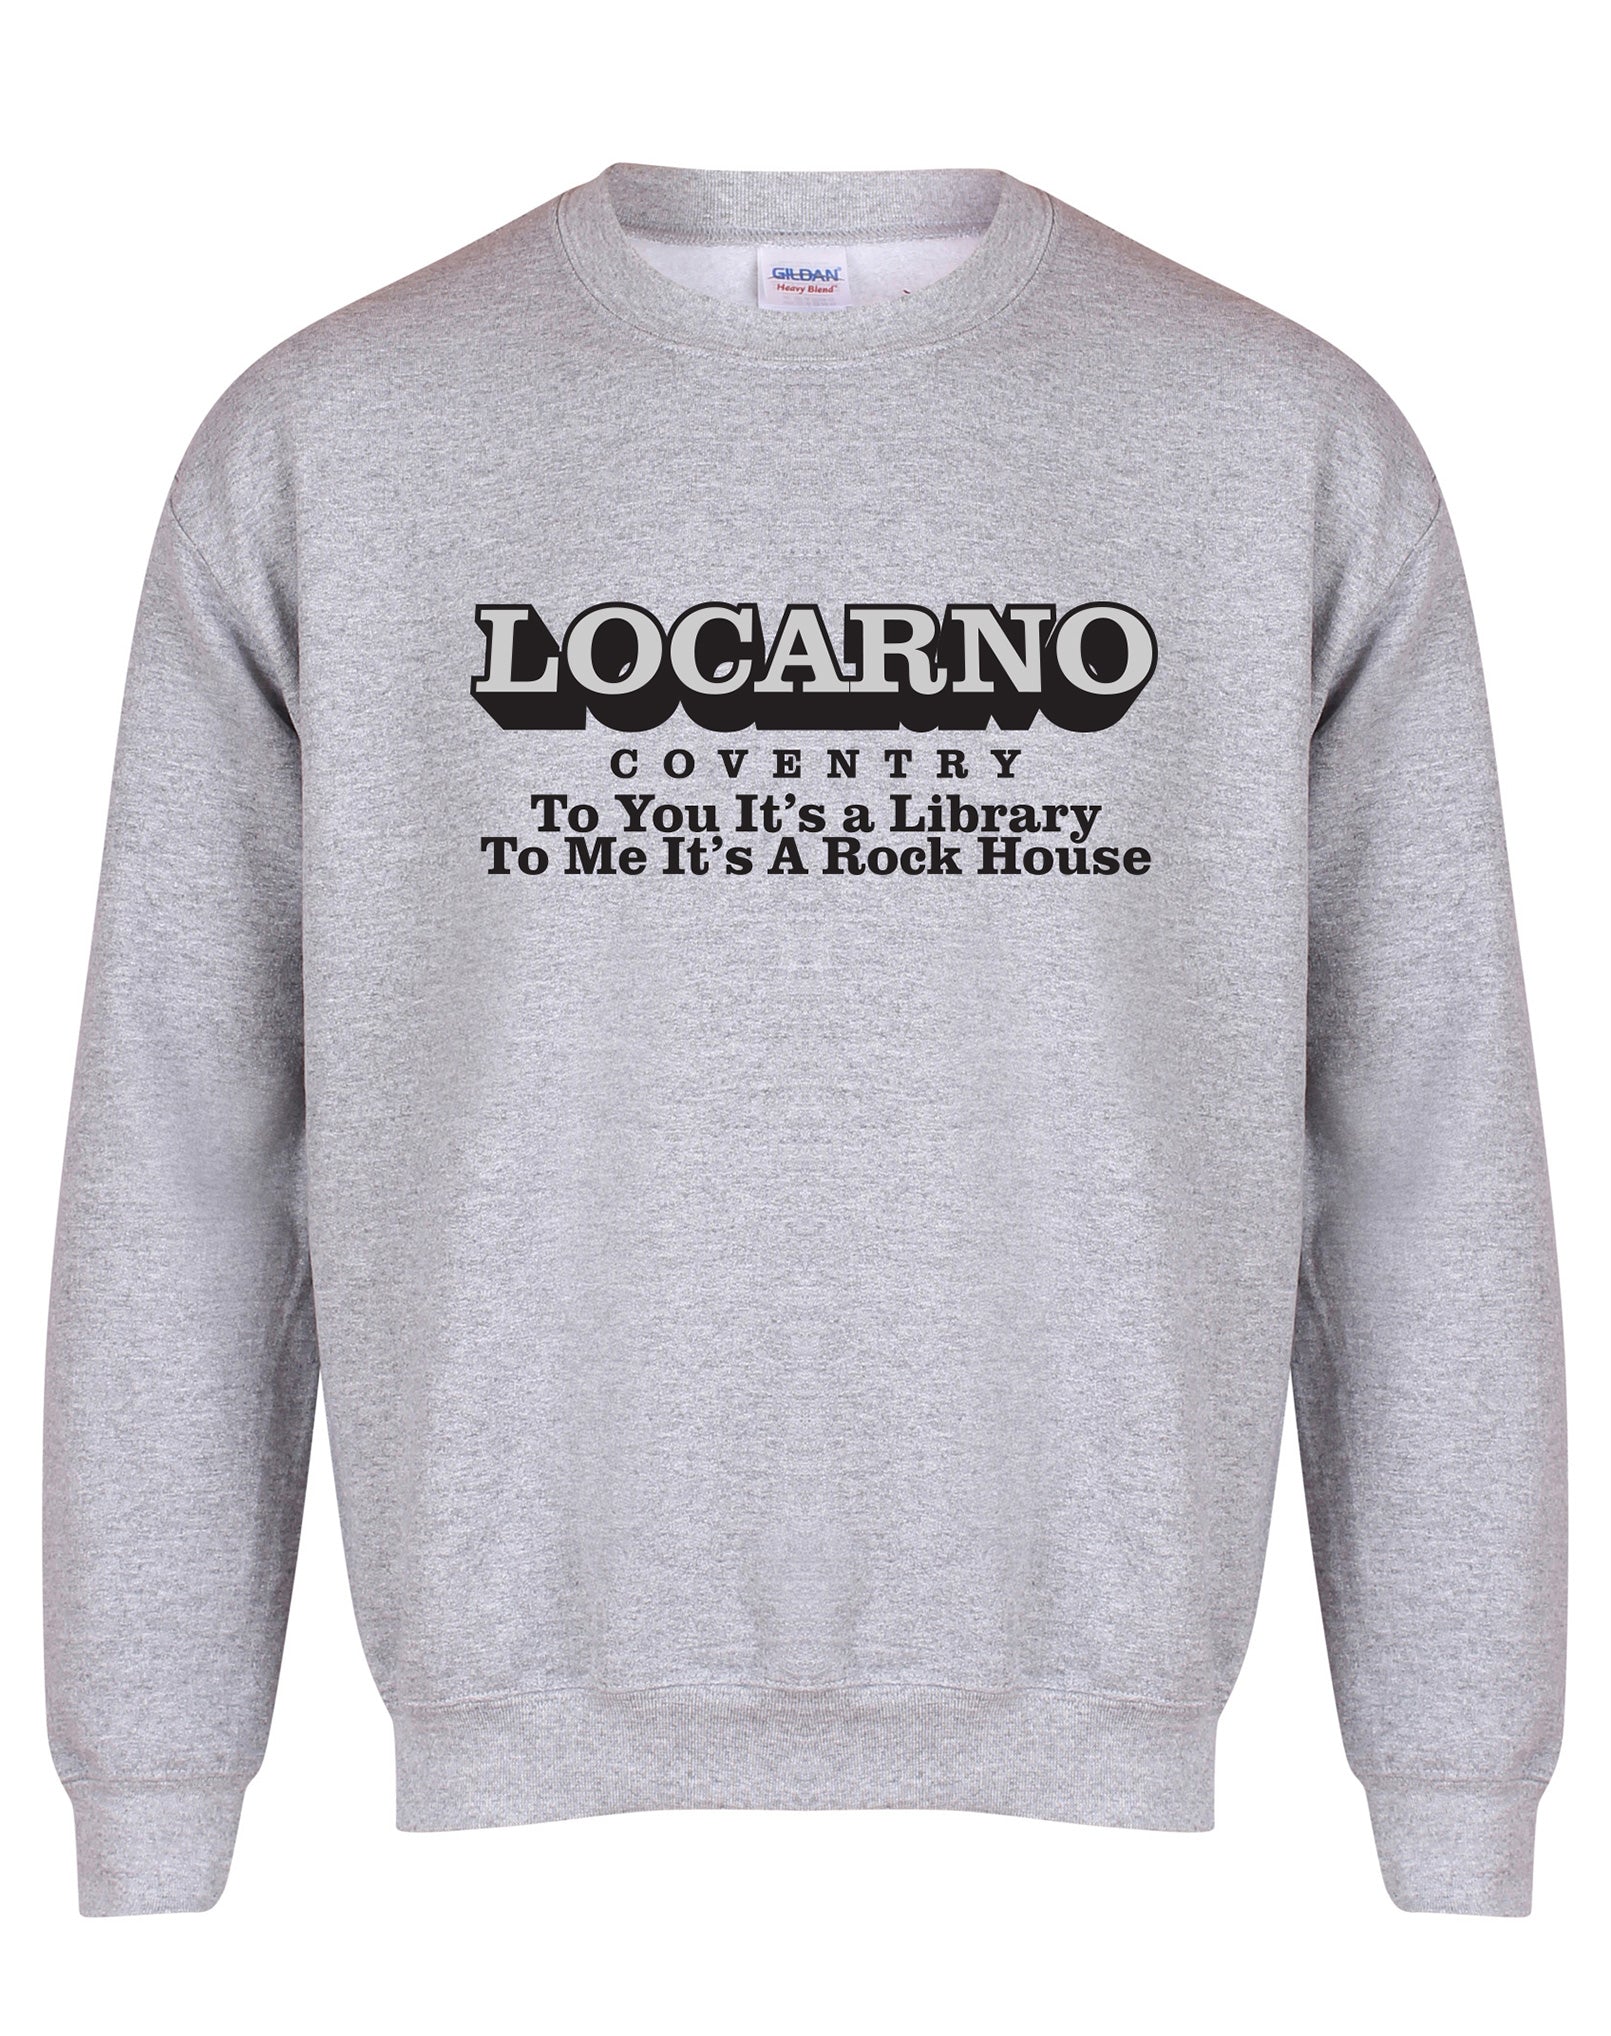 Locarno/Rockhouse - Coventry - unisex fit sweatshirt - various colours - Dirty Stop Outs